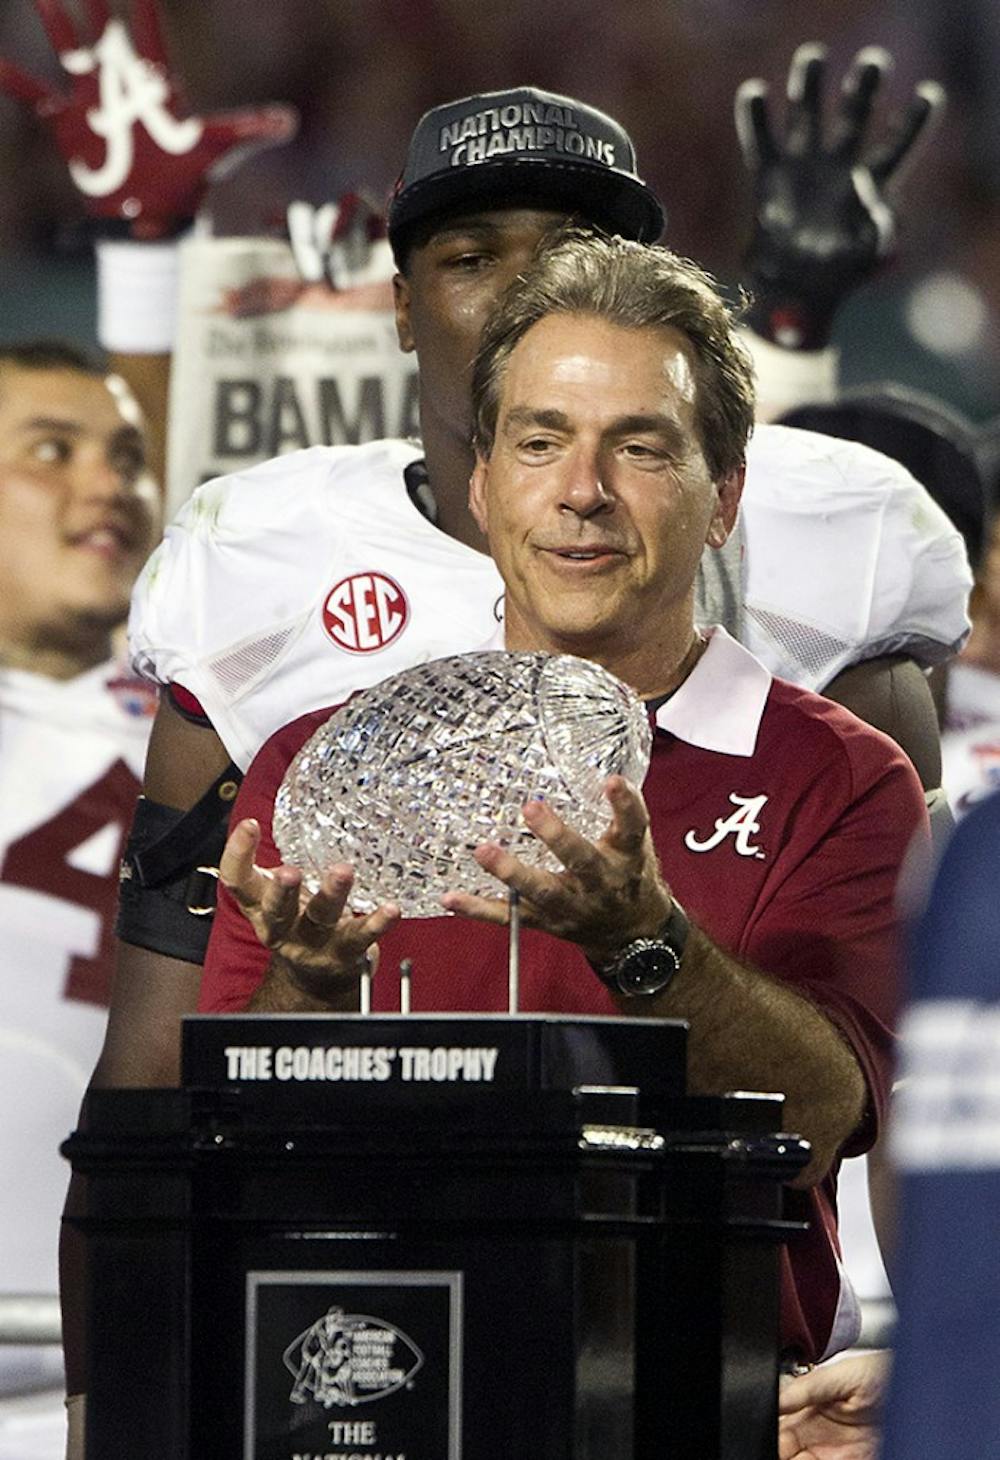 Alabama head coach Nick Saban hoists the trophy following a 42-14 win against Notre Dame in the BCS National Championship game at Sun Life Stadium on Monday, January 7, 2013, in Miami Gardens, Florida. (C.W. Griffin/Miami Herald/MCT)